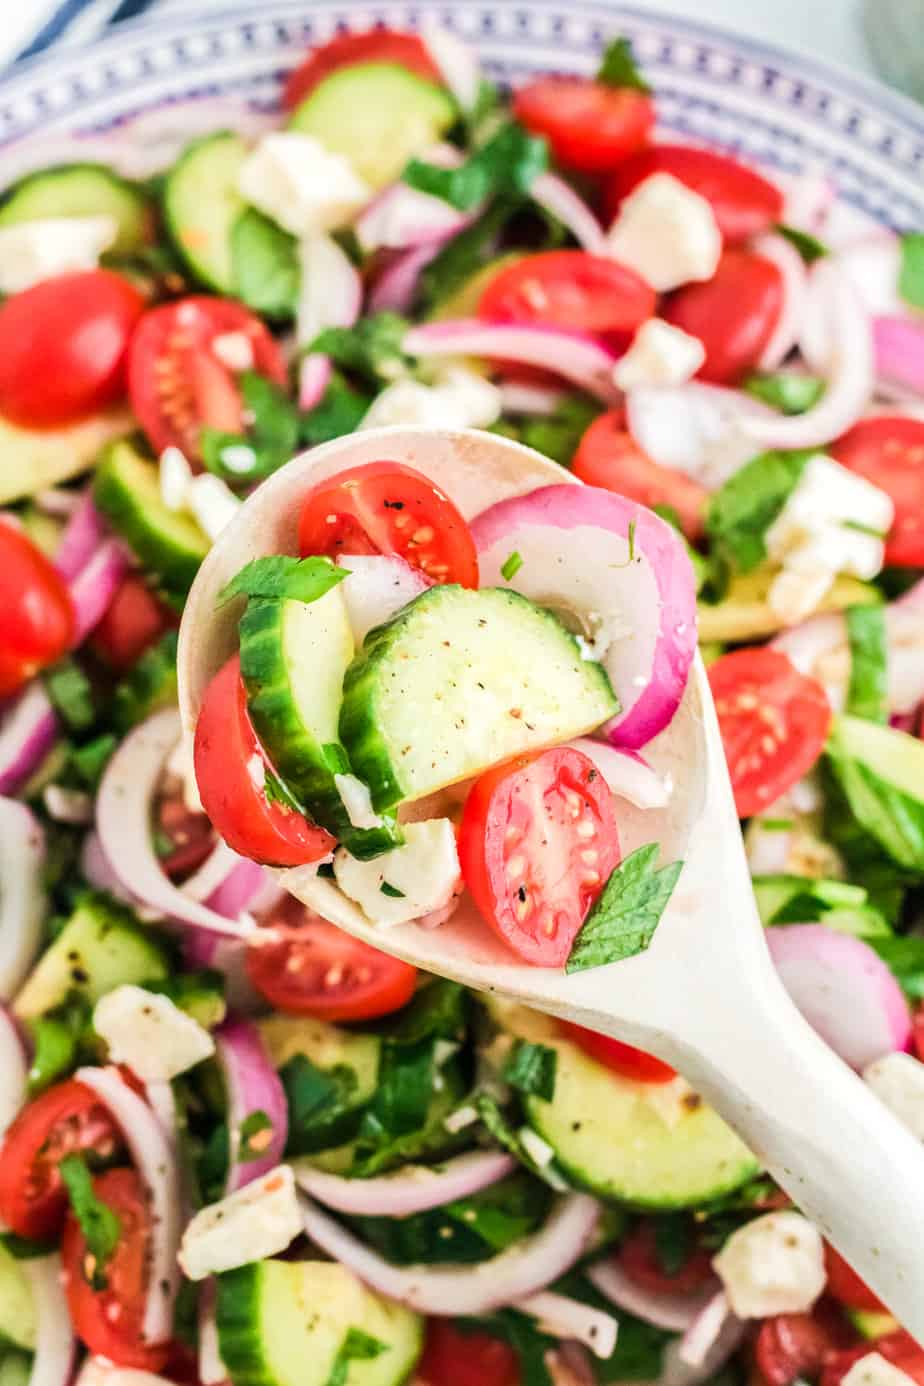 A wooden spoon scooping cucumber tomato salad salad from a bowl up close from overhead.